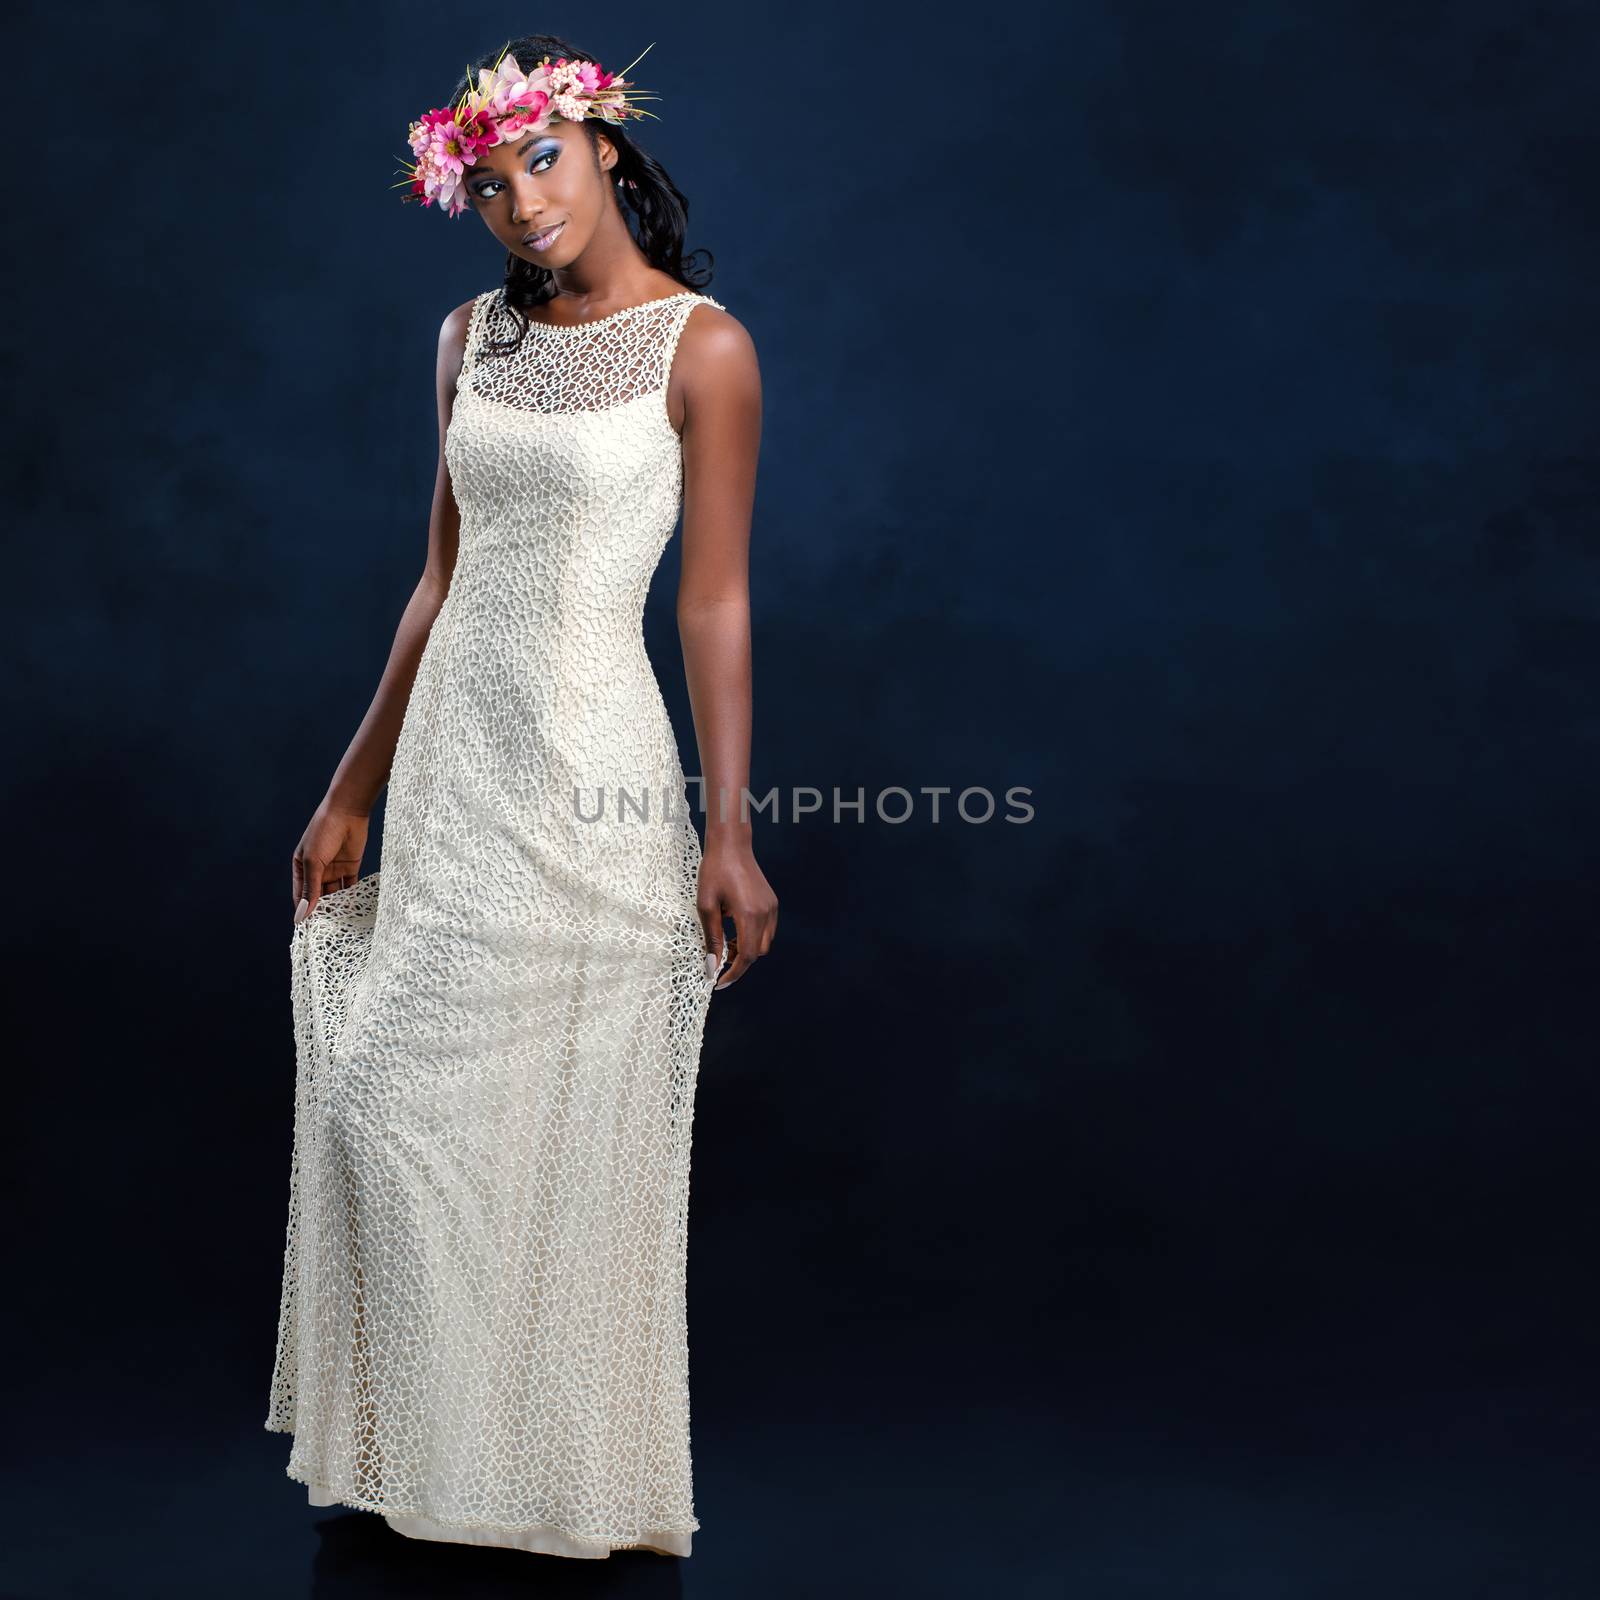 Full length studio portrait of beautiful young african bride in long white wedding gown. Woman wearing colorful flower garland against dark blue background.